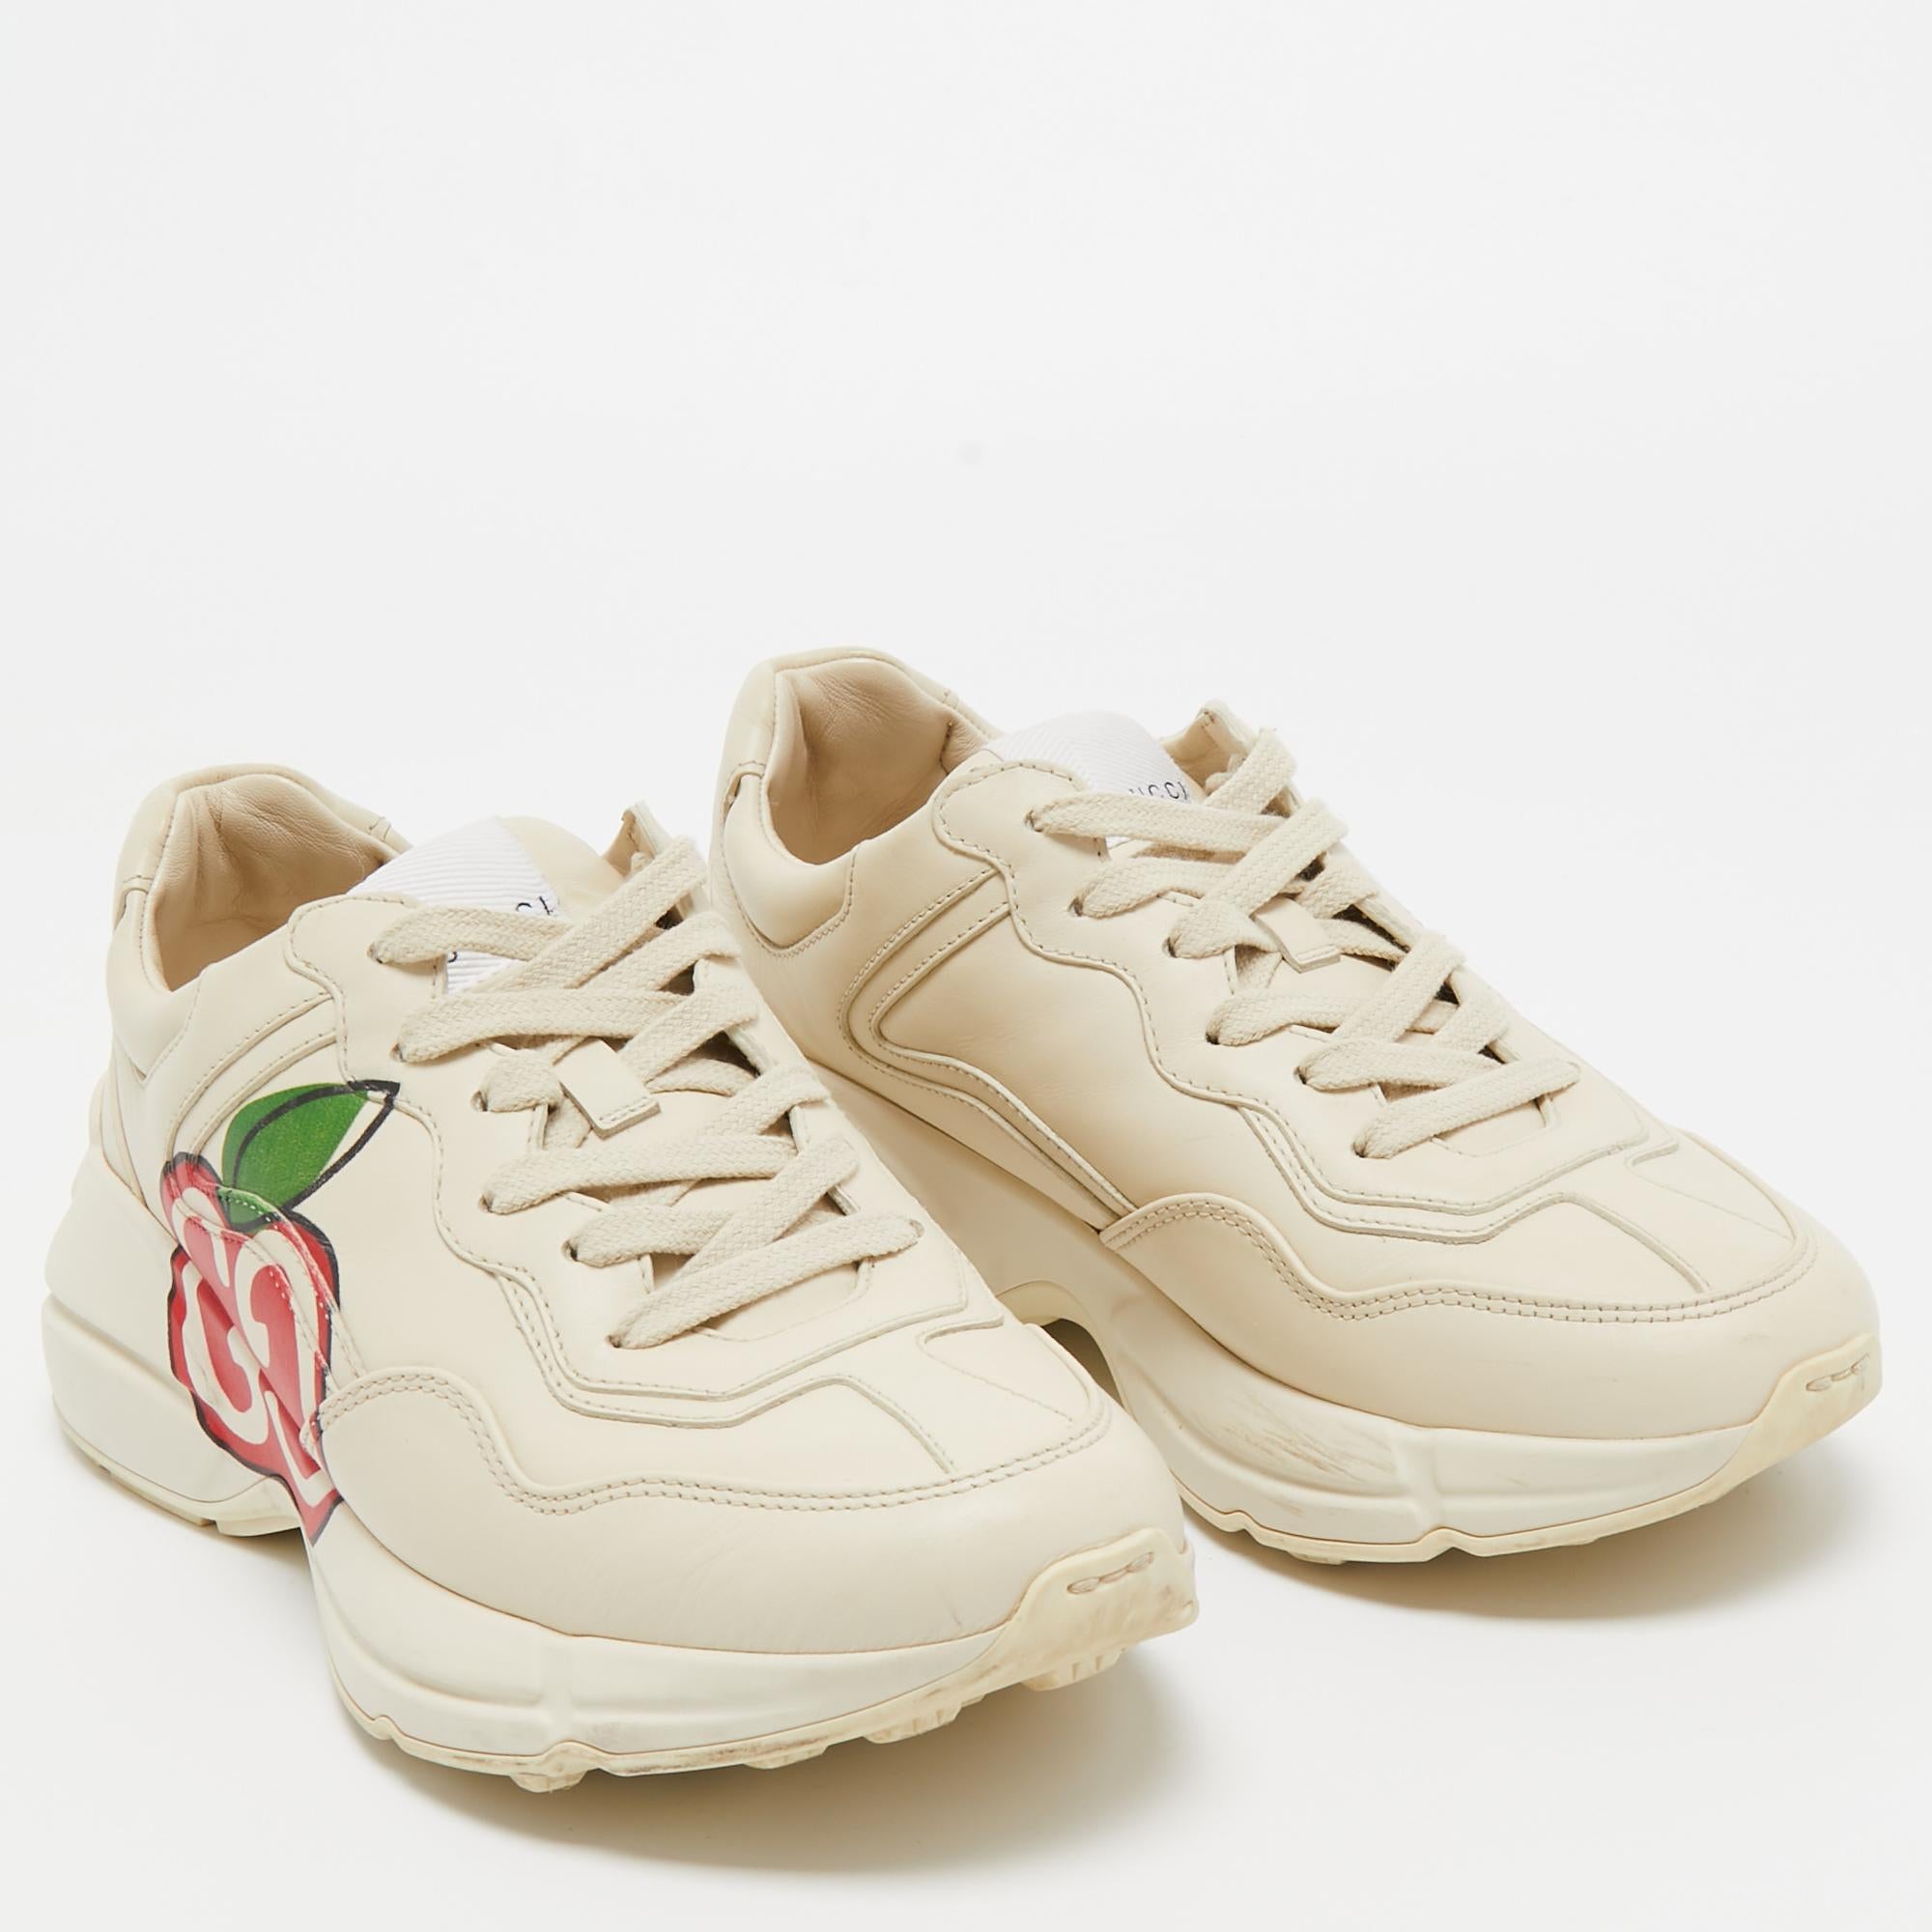 Gucci Cream Leather Rhyton Low Top Sneakers Size 37.5 3